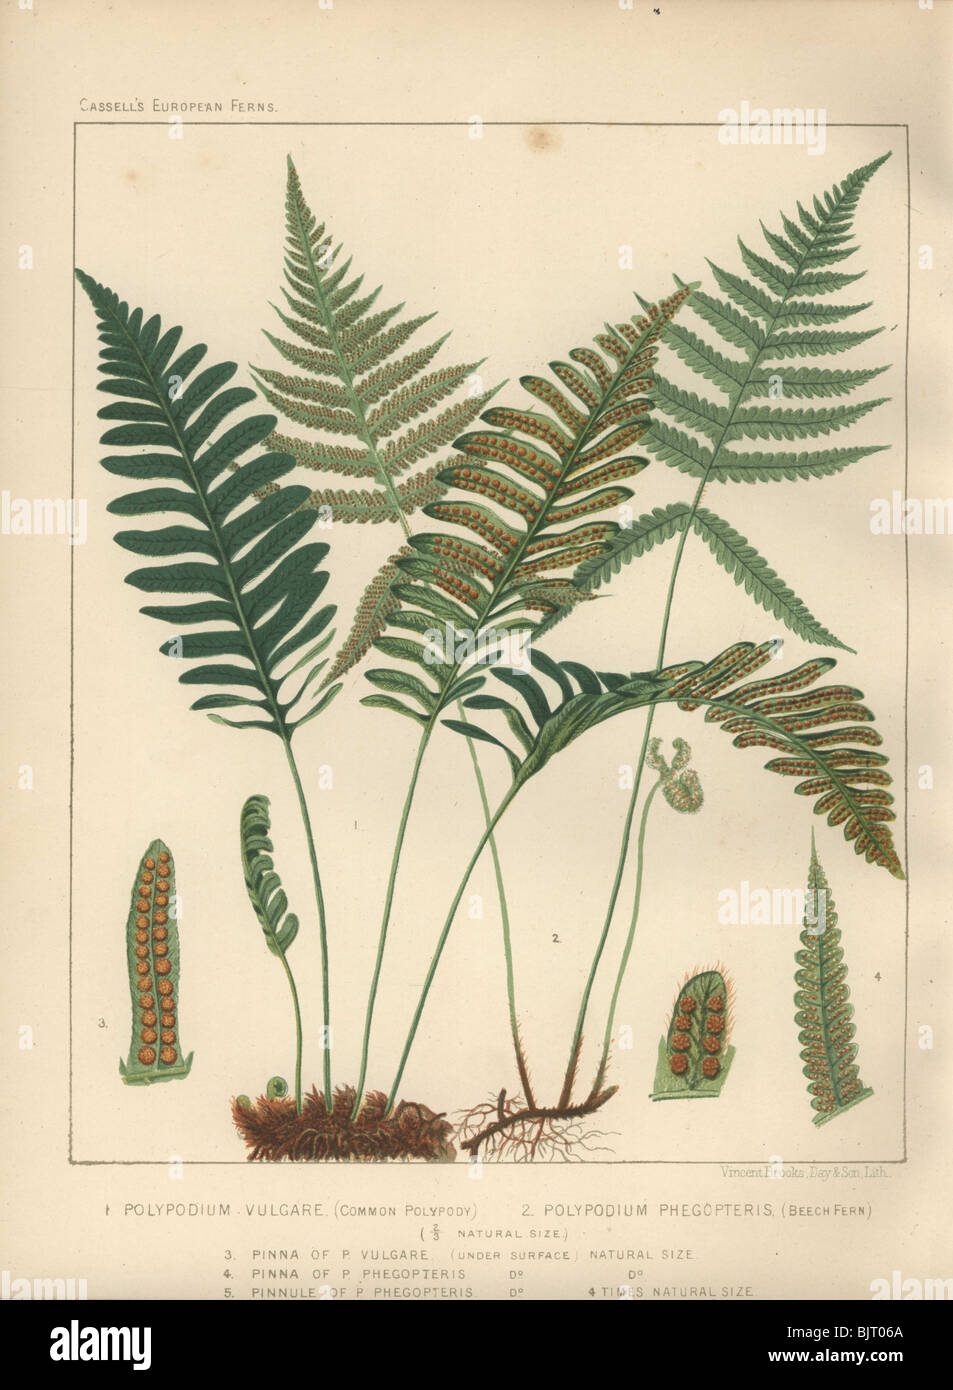 Common polypody fern (Polypodium vulgare) at left, and the beech fern (Polypodium phegopteris) at right. Stock Photo